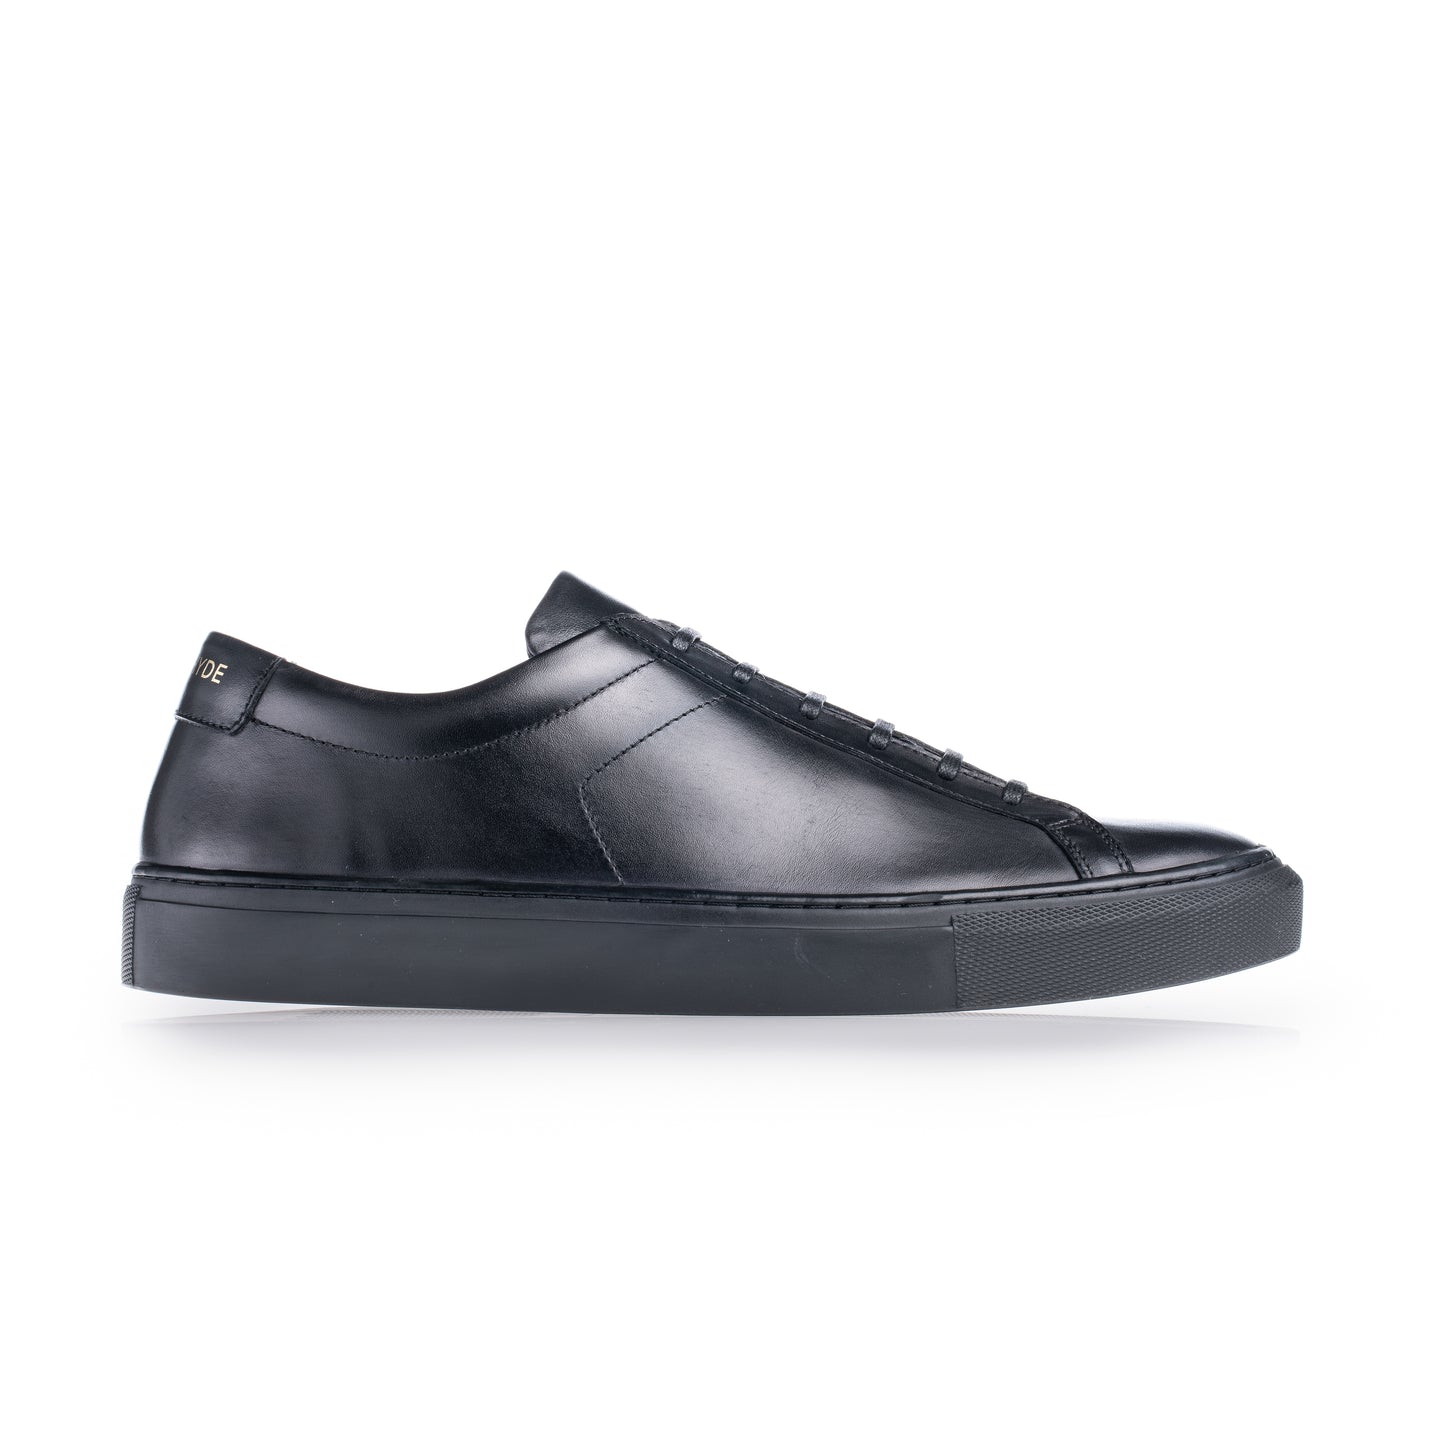 Men's black leather trainers with black sole